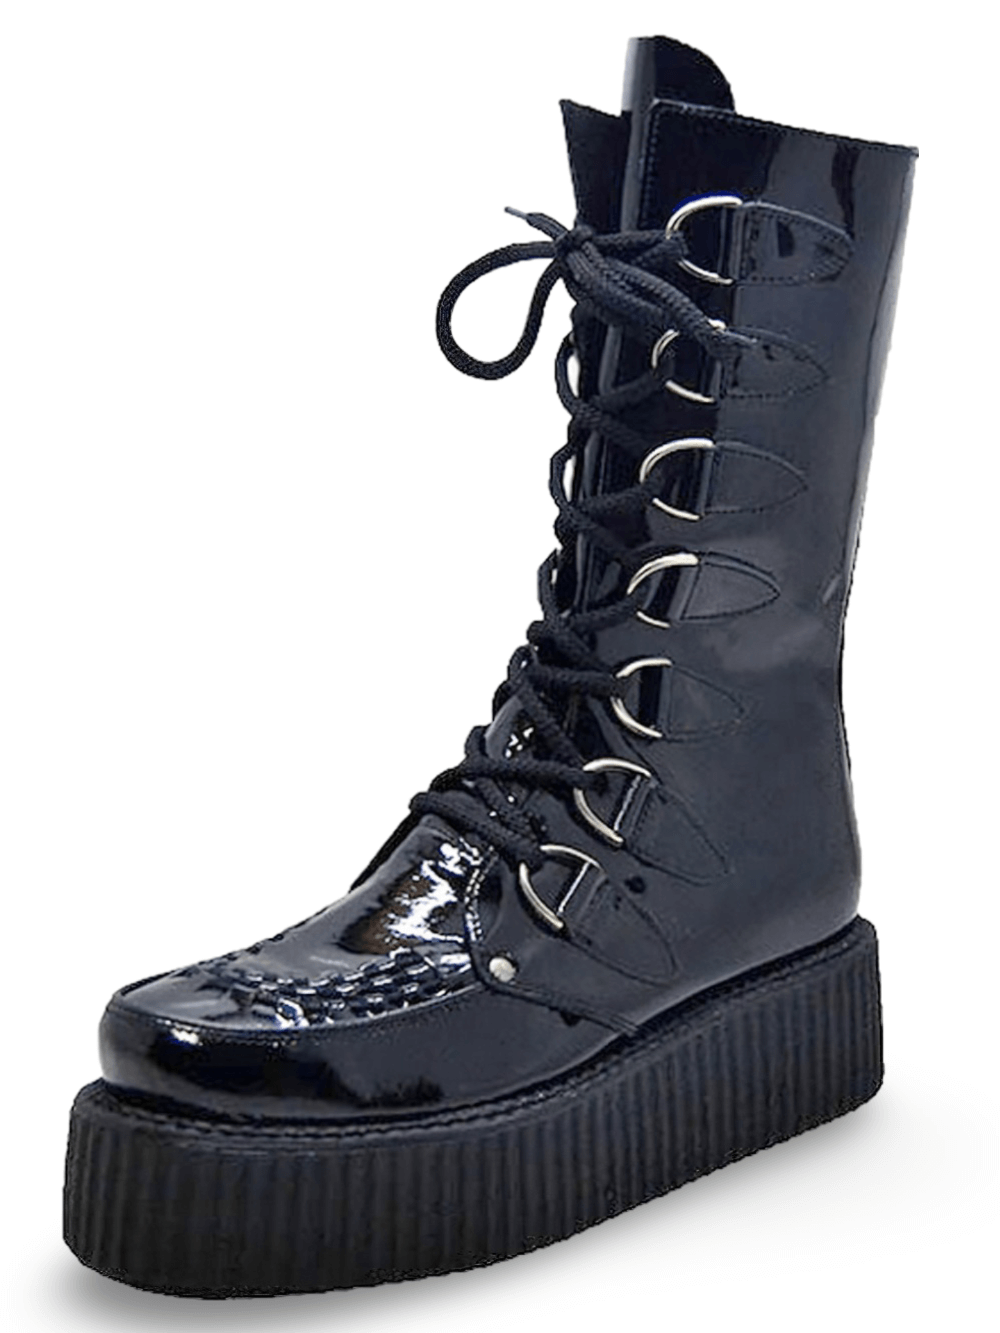 Black Patent Leather Double Sole Boot Creepers